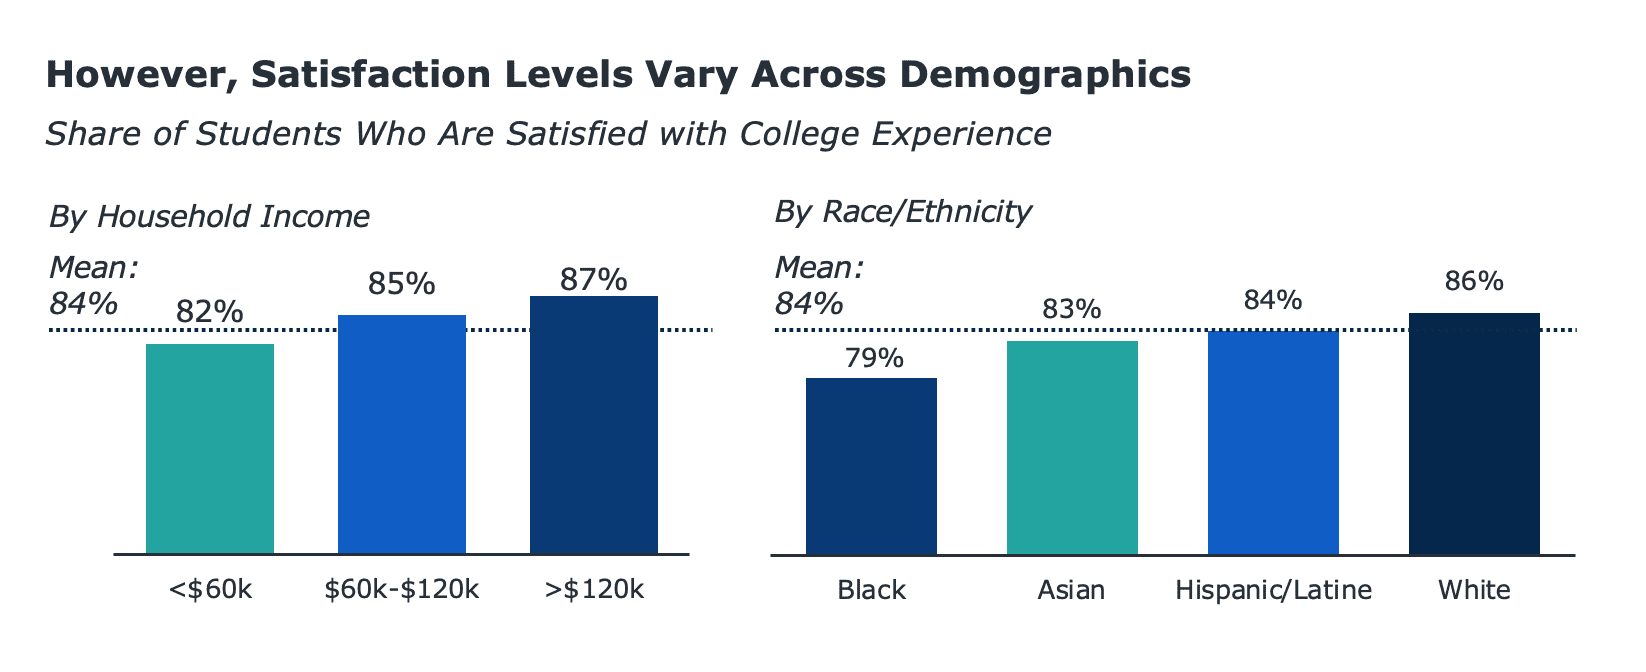 Bar chat describing how satisfaction levels vary between income and race/ethnicity.